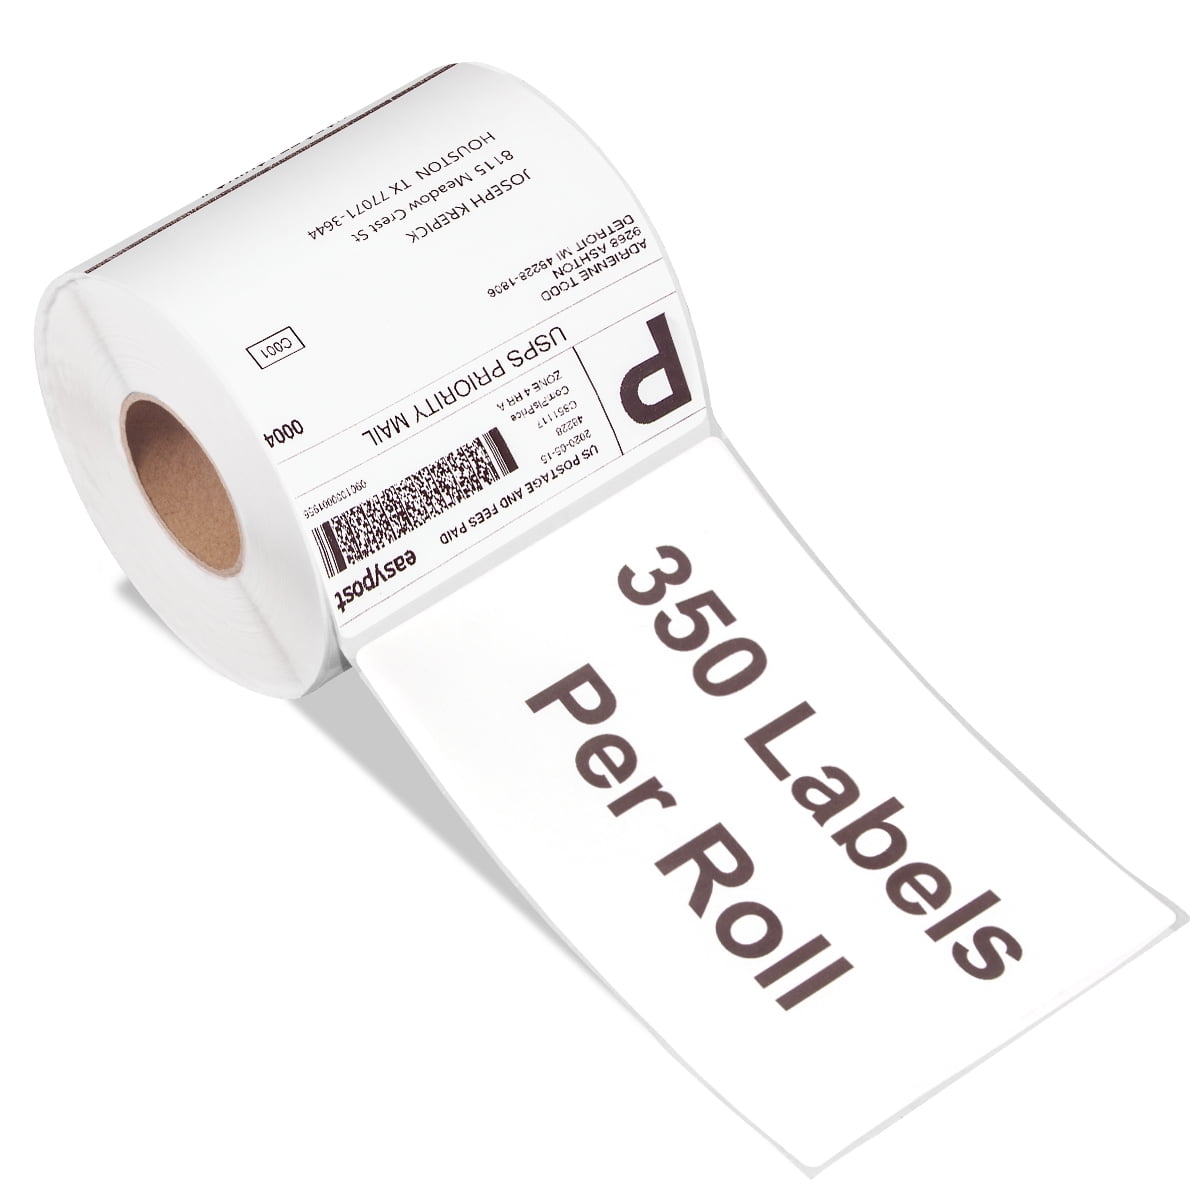 20 Rolls 500 labels each roll 3x3 Direct Thermal Shipping Labels Zebra 2844 